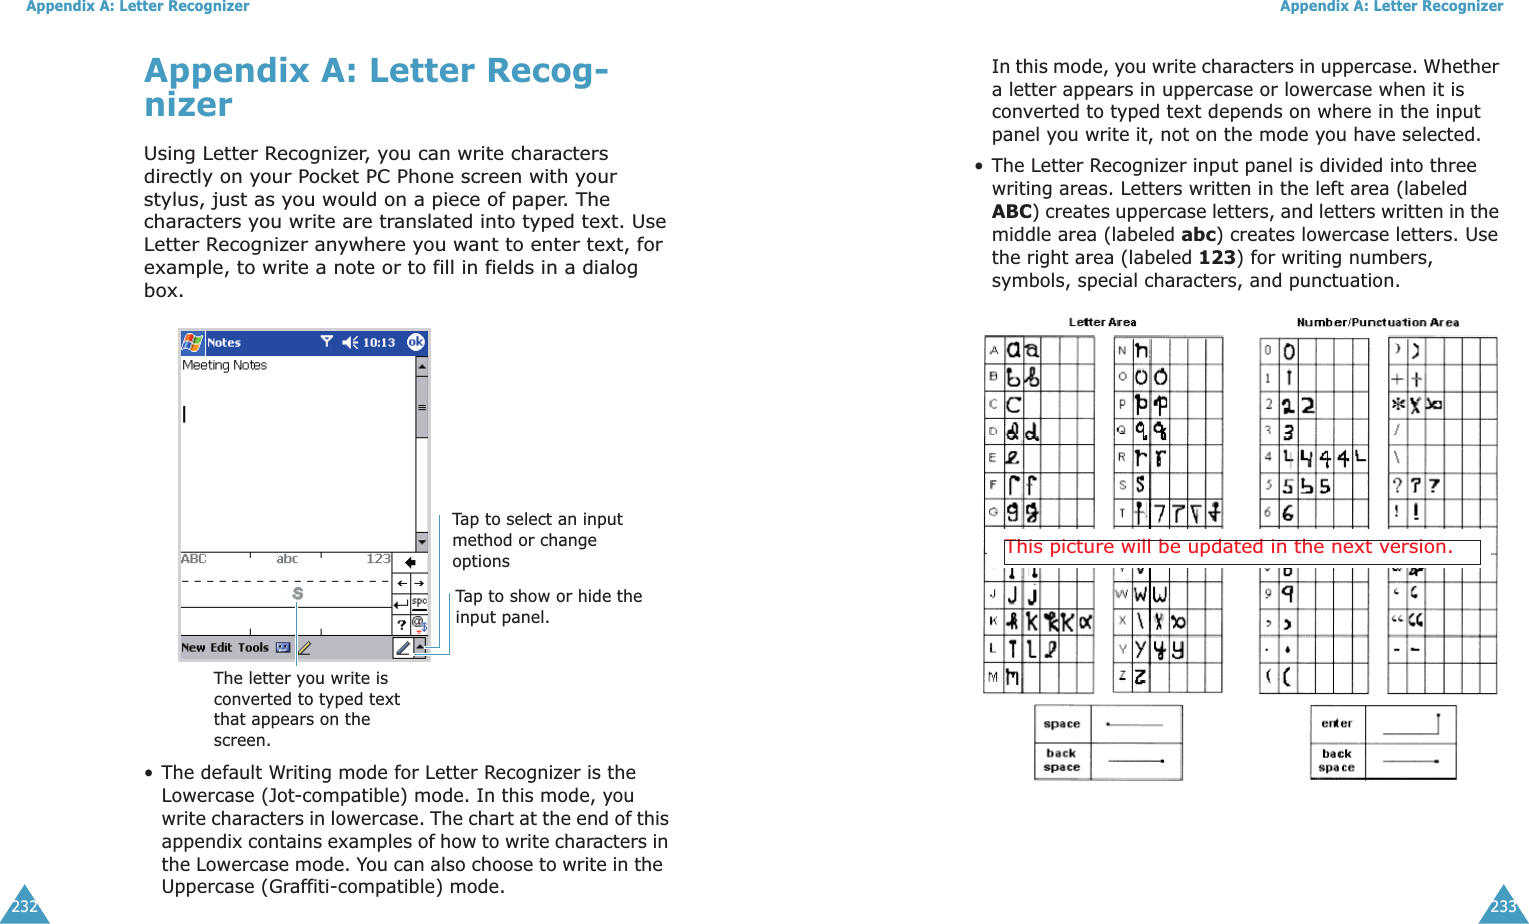 Appendix A: Letter Recognizer232Appendix A: Letter Recog-nizerUsing Letter Recognizer, you can write characters directly on your Pocket PC Phone screen with your stylus, just as you would on a piece of paper. The characters you write are translated into typed text. Use Letter Recognizer anywhere you want to enter text, for example, to write a note or to fill in fields in a dialog box.• The default Writing mode for Letter Recognizer is the Lowercase (Jot-compatible) mode. In this mode, you write characters in lowercase. The chart at the end of this appendix contains examples of how to write characters in the Lowercase mode. You can also choose to write in the  Uppercase (Graffiti-compatible) mode. Tap to select an input method or change optionsTap to show or hide the input panel.The letter you write is converted to typed text that appears on the screen.Appendix A: Letter Recognizer233In this mode, you write characters in uppercase. Whether a letter appears in uppercase or lowercase when it is converted to typed text depends on where in the input panel you write it, not on the mode you have selected.• The Letter Recognizer input panel is divided into three writing areas. Letters written in the left area (labeled ABC) creates uppercase letters, and letters written in the middle area (labeled abc) creates lowercase letters. Use the right area (labeled 123) for writing numbers, symbols, special characters, and punctuation.This picture will be updated in the next version.